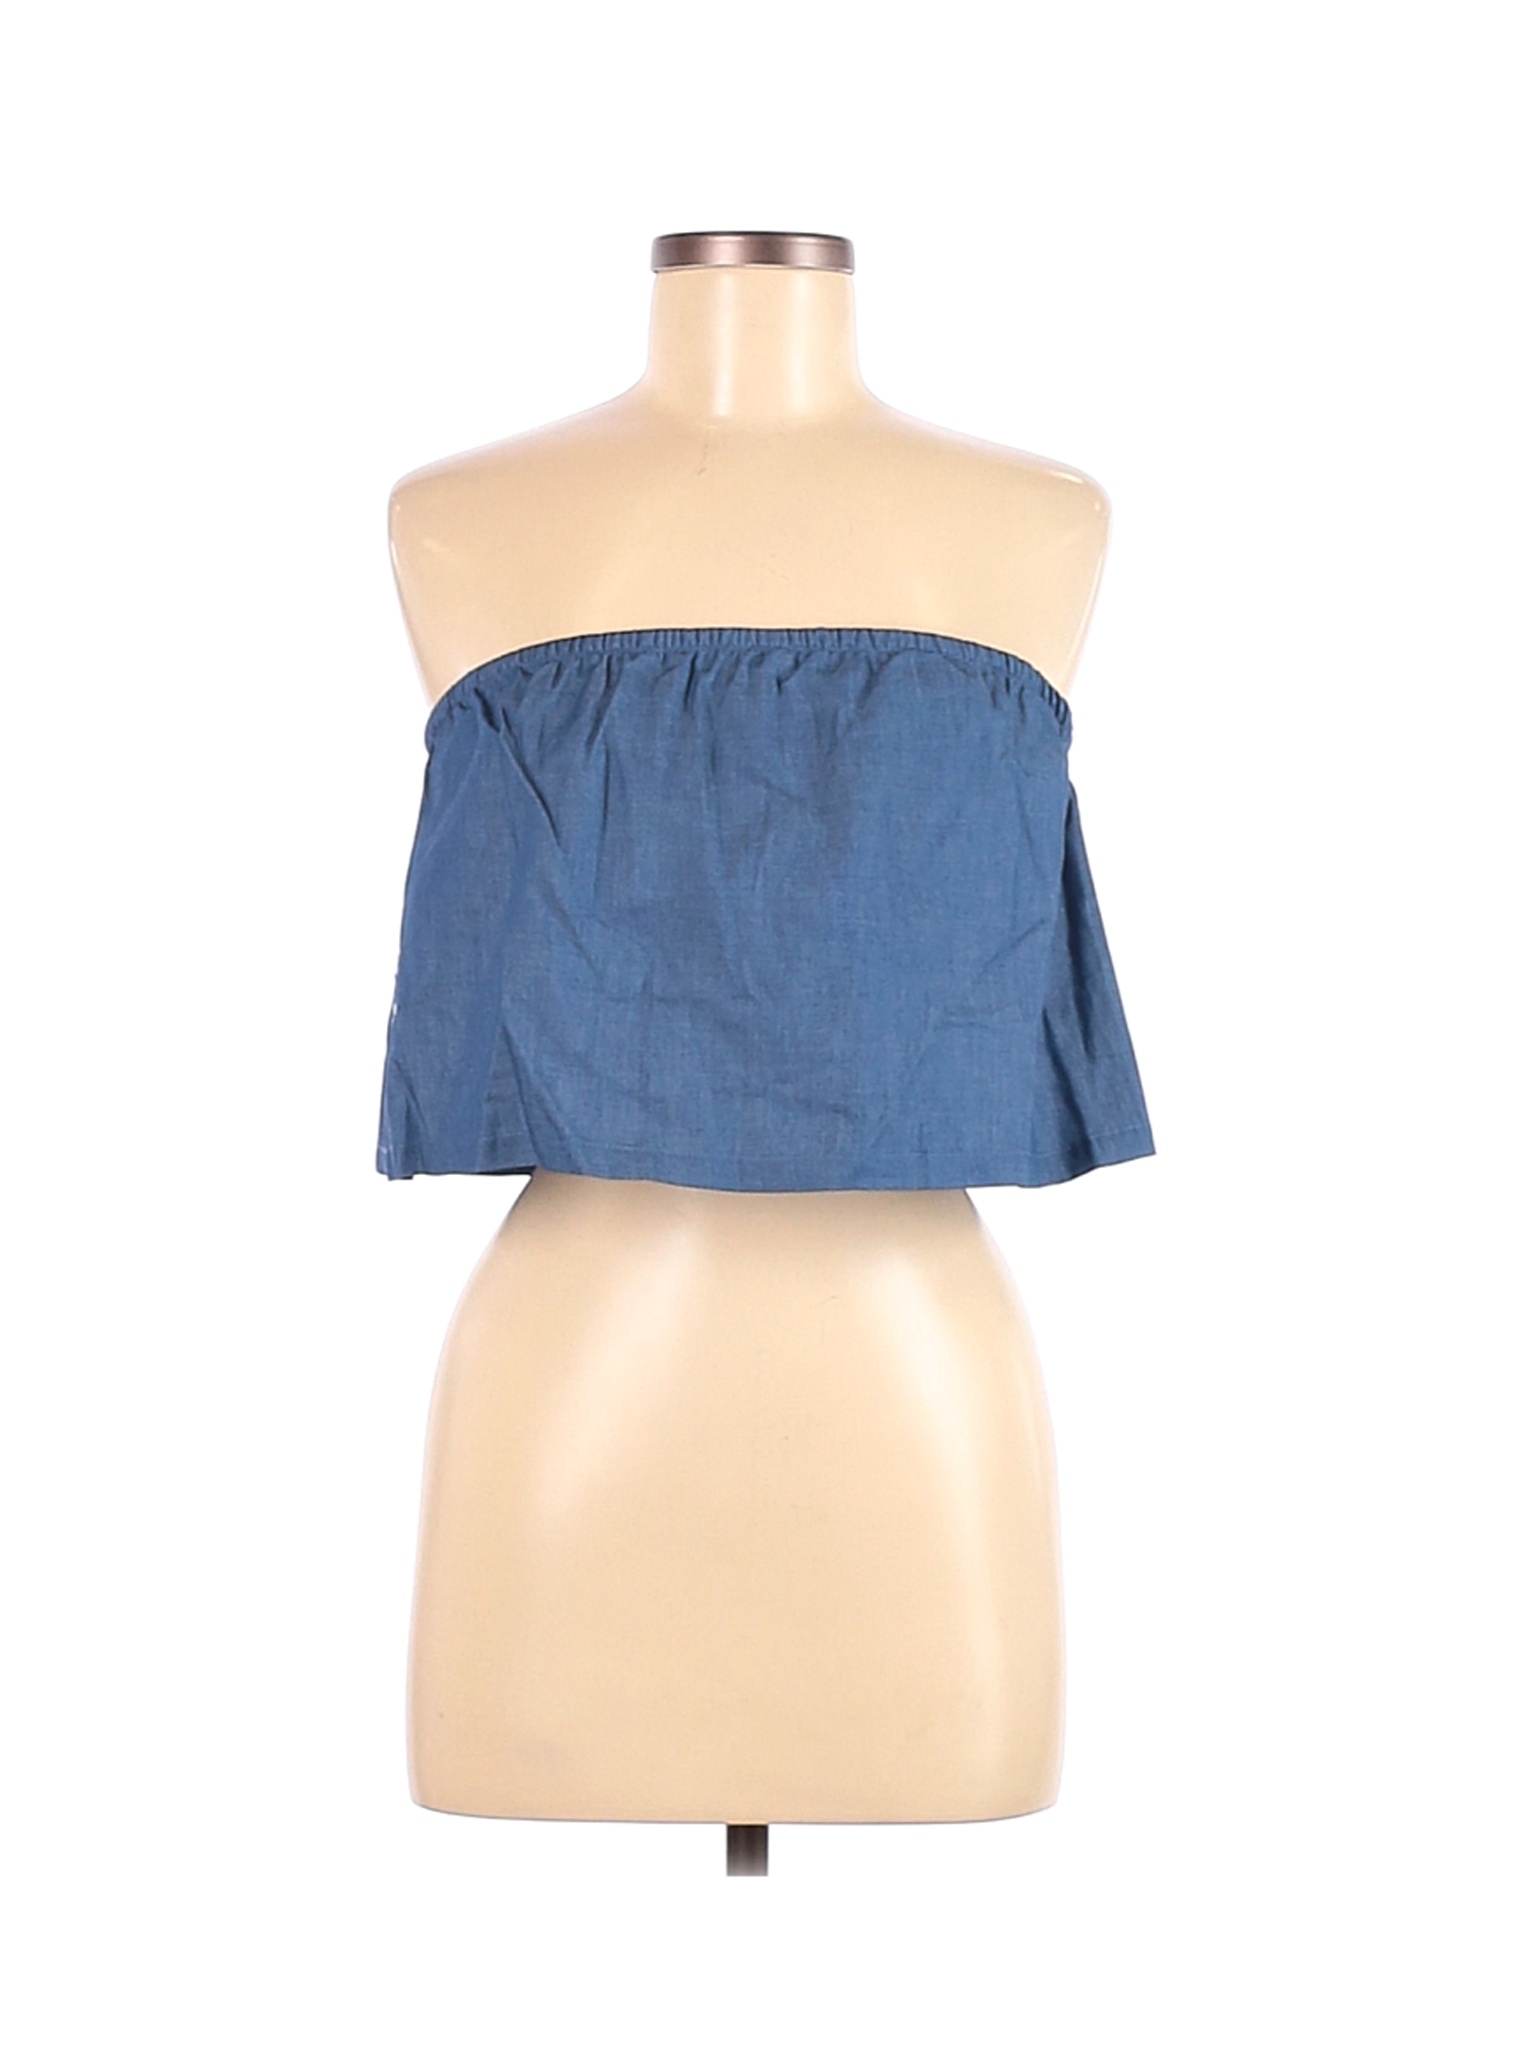 NWT Available Women Blue Tube Top M | eBay